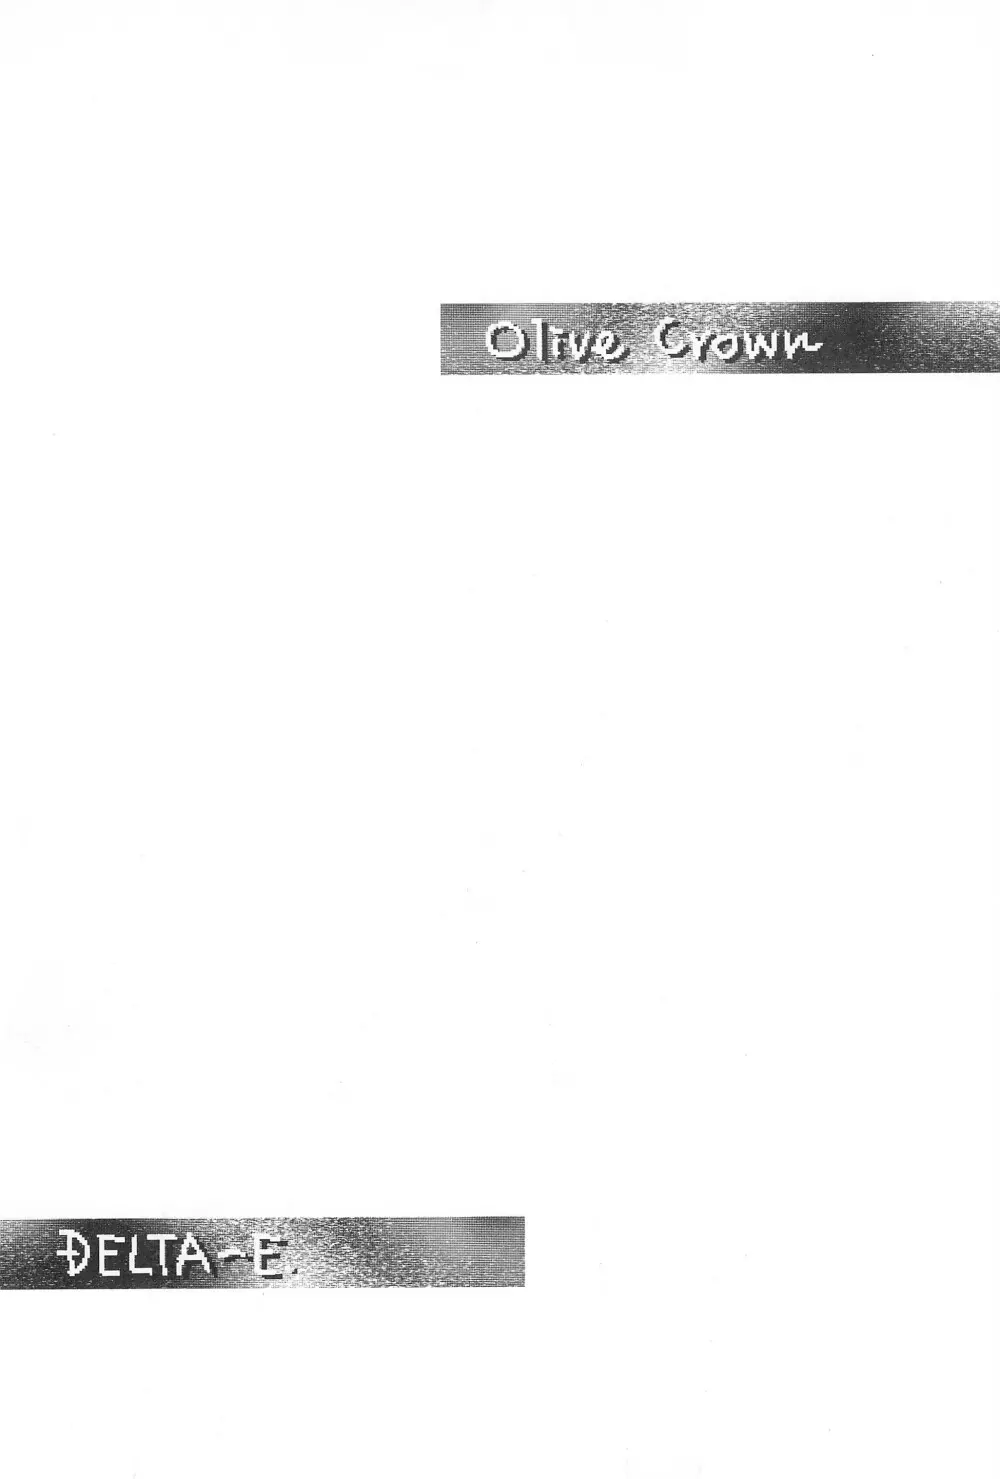 Olive Crown Page.6